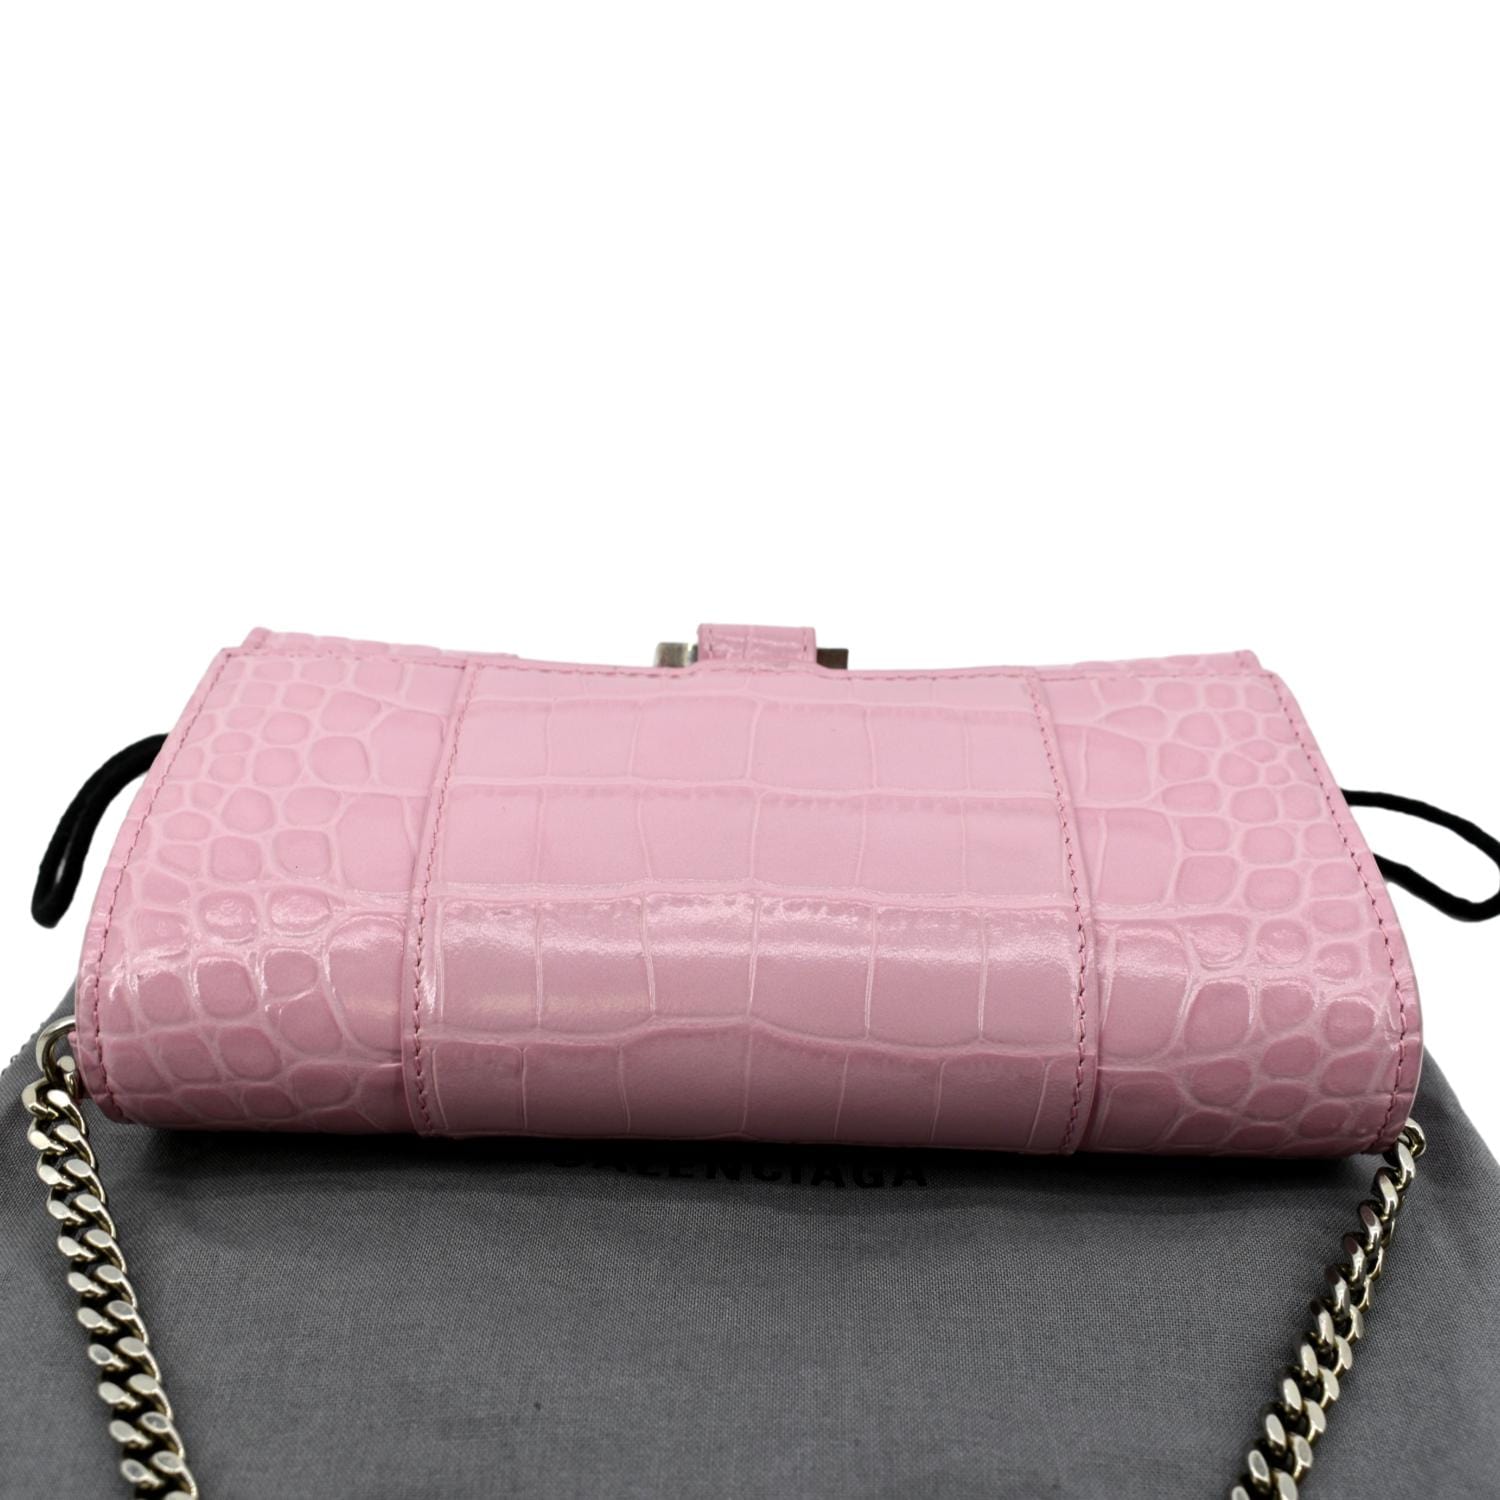 Hourglass Croc Effect Leather Tote Bag in Pink - Balenciaga